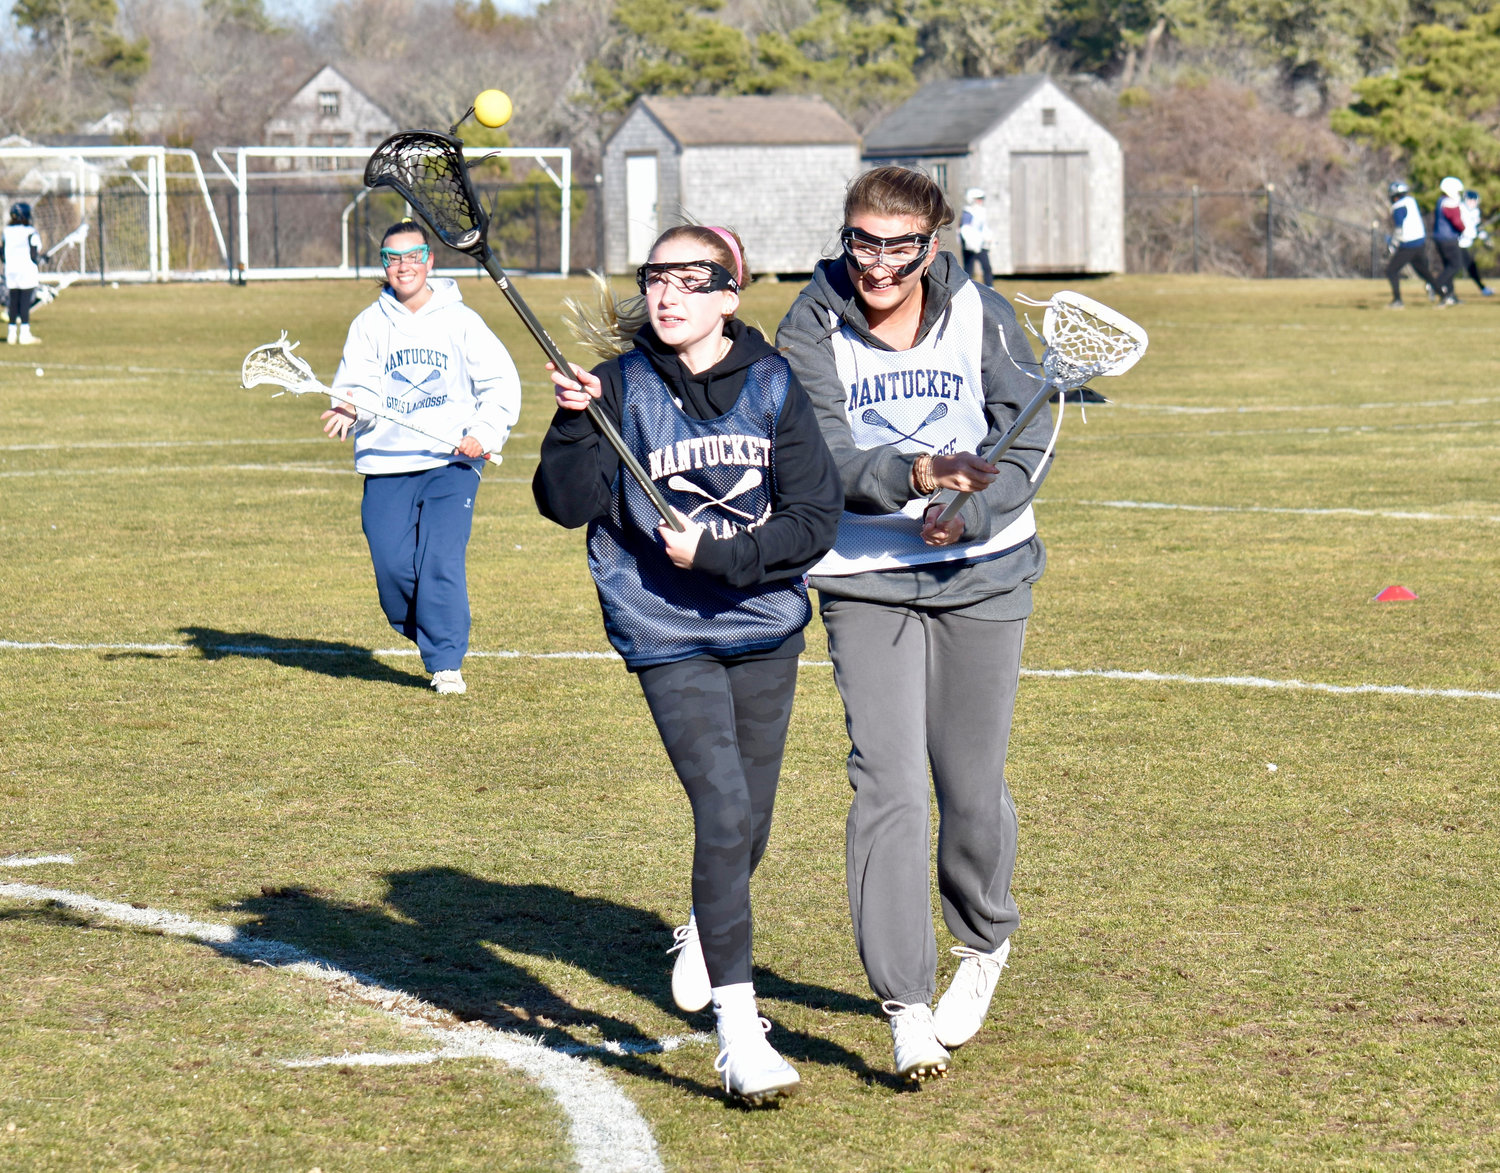 Grace Keane and Ella Finlay battle for a loose ball during Monday's girls lacrosse practice, the first day of spring sports at NHS.